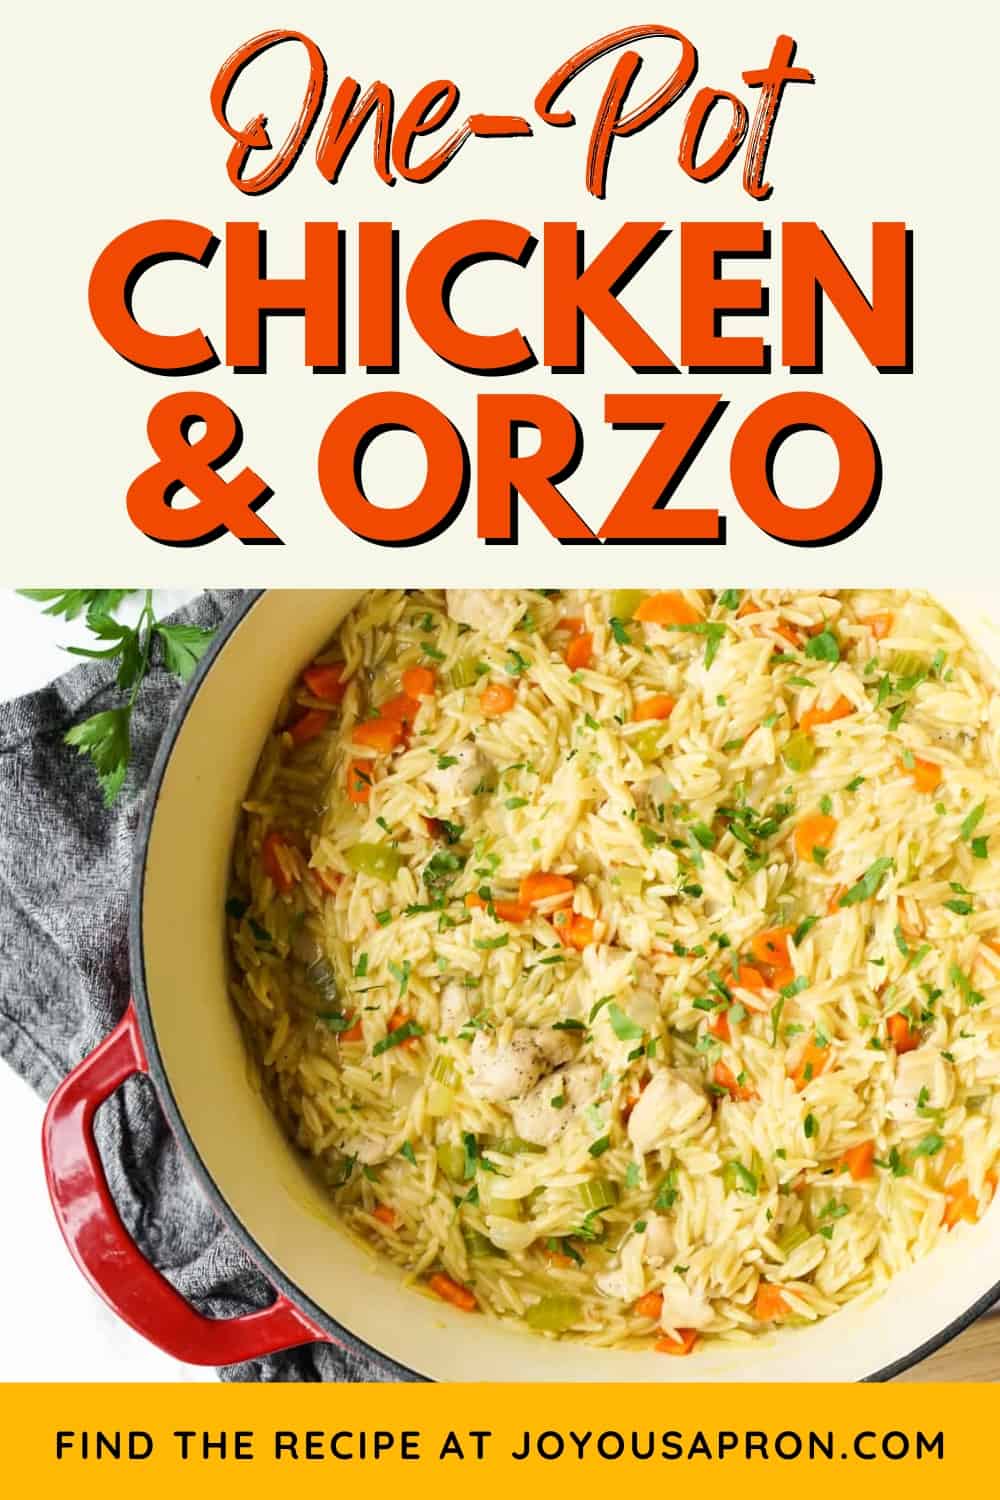 One-Pot Chicken and Orzo - delicious and easy one-pot meal, perfect for busy evenings! This chicken and orzo recipe is combined with carrots, celery and onions in a thick chunky broth. via @joyousapron